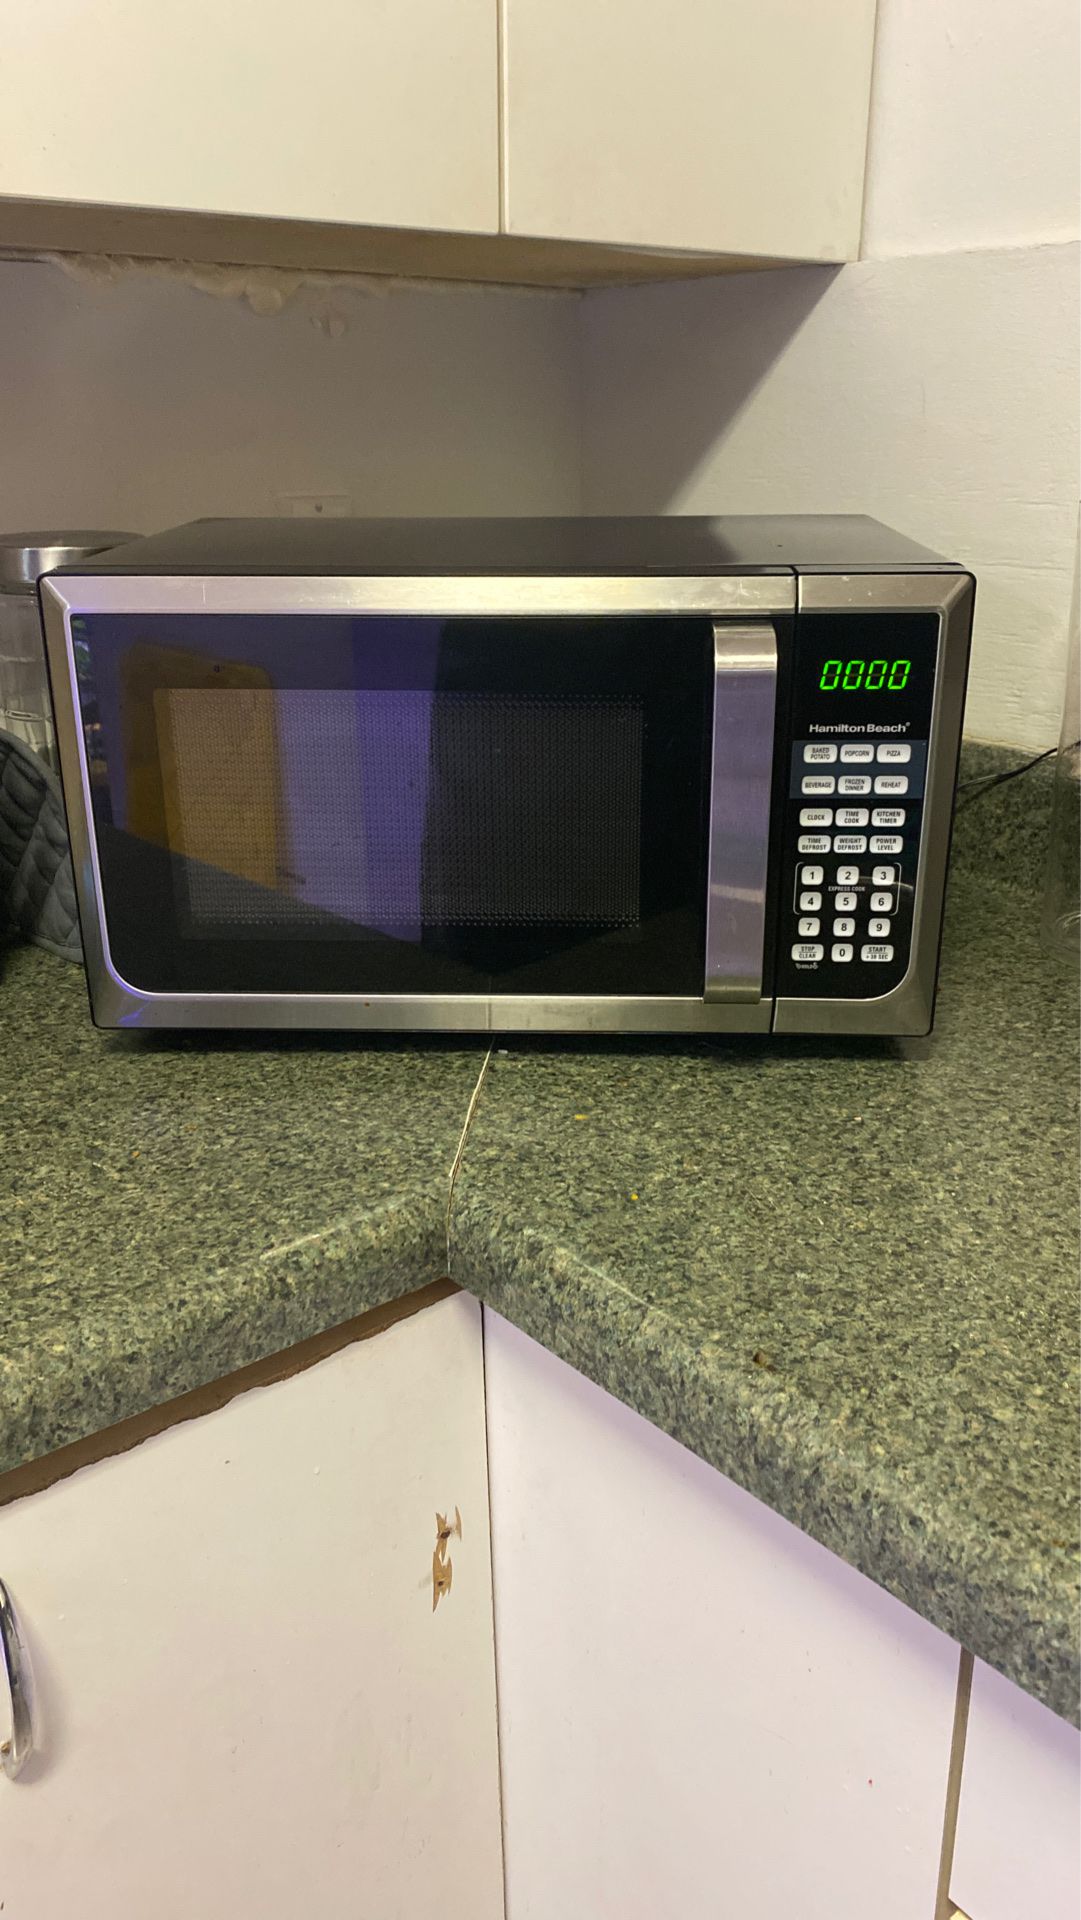 Microwave works perfect